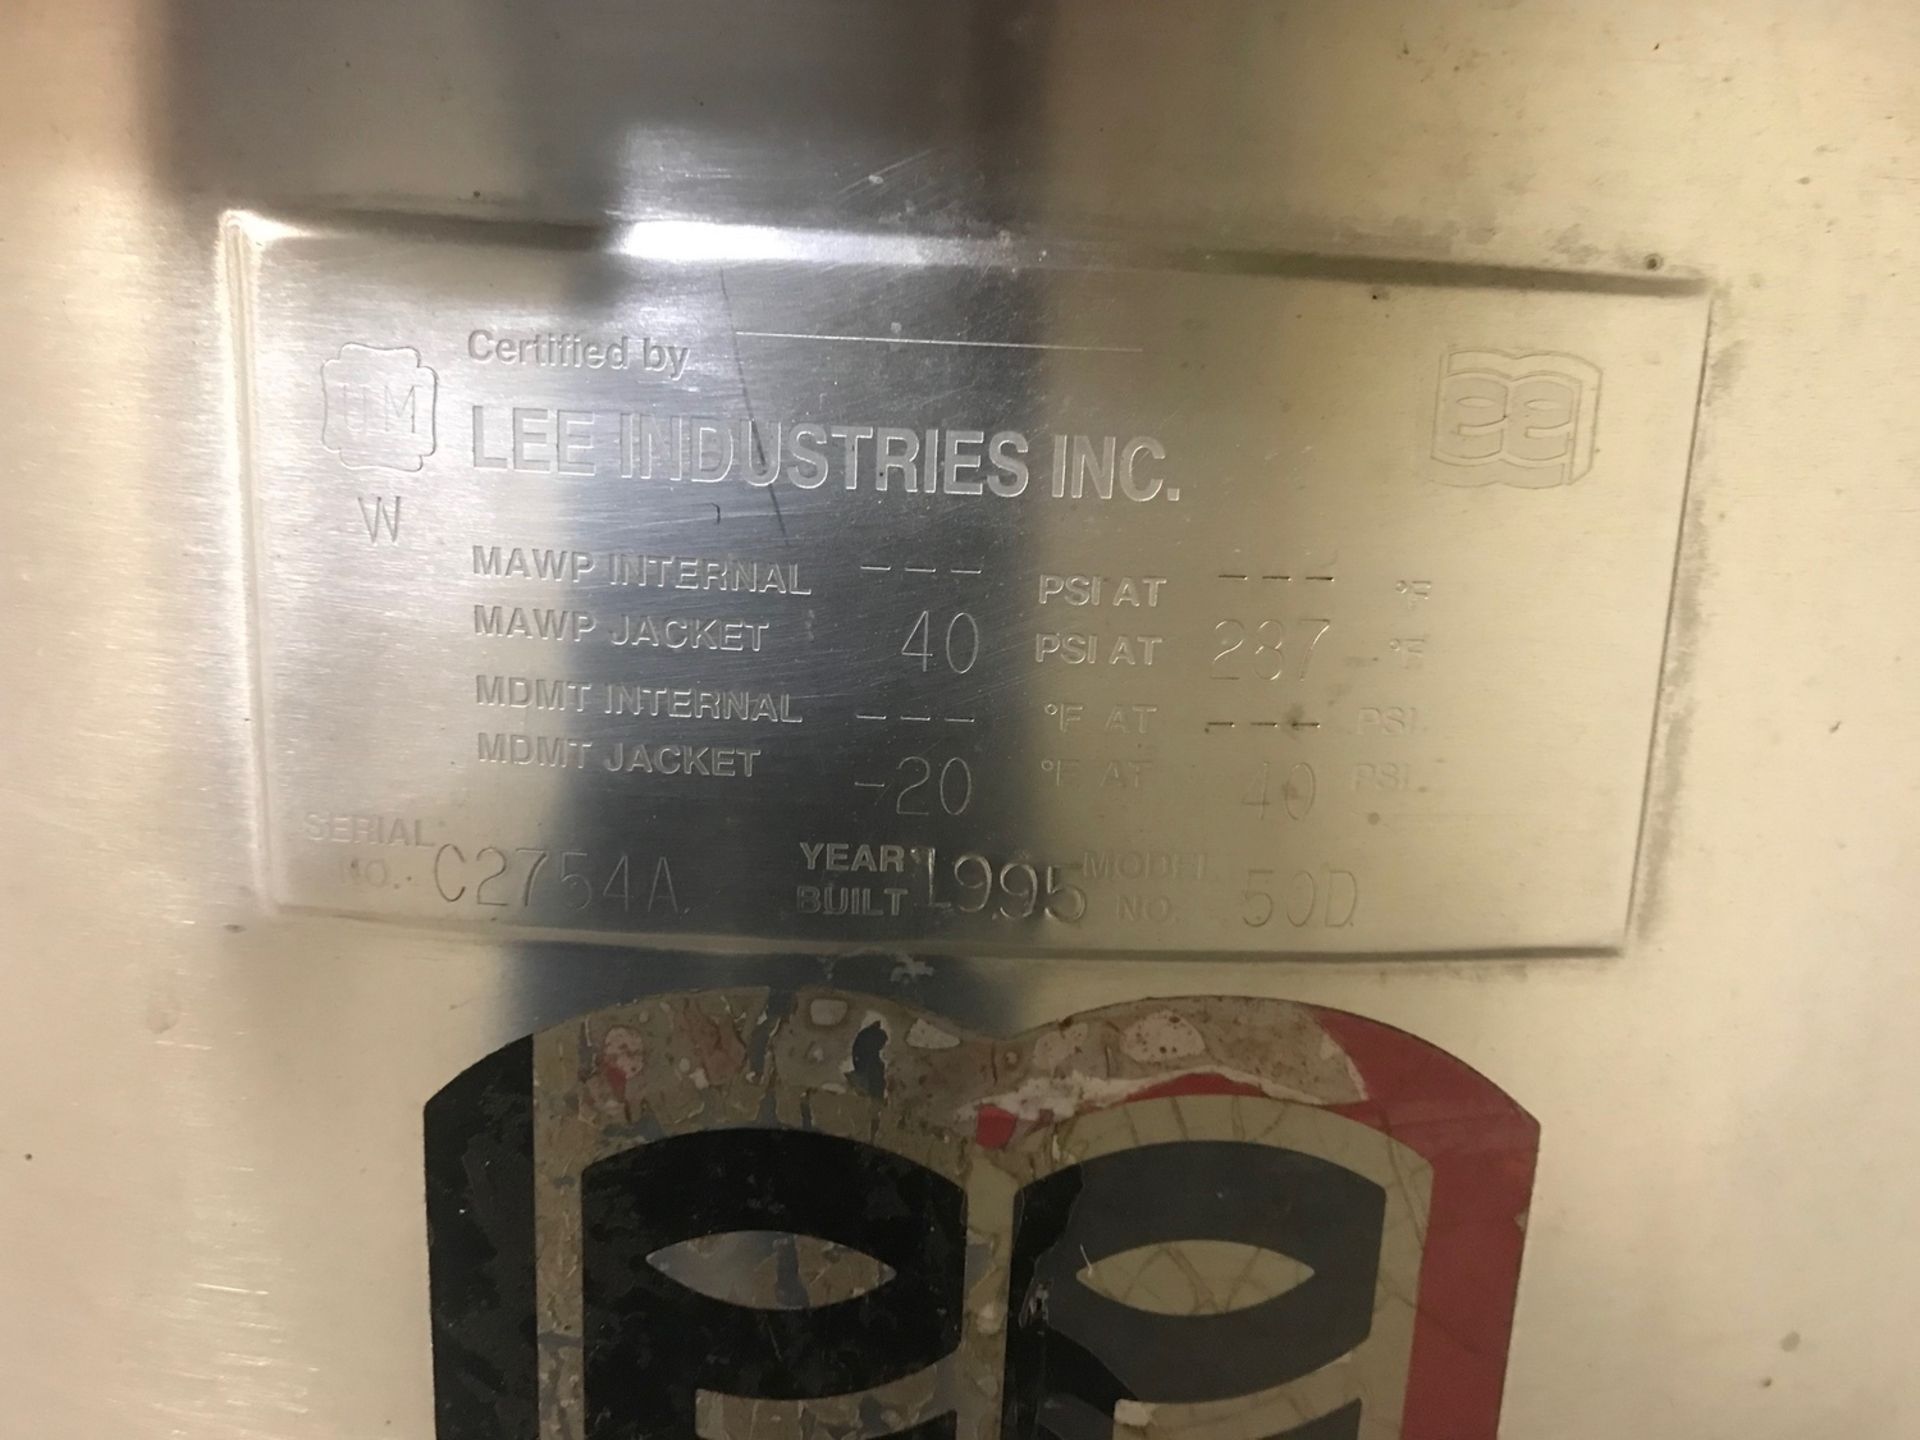 Lee Industries 50D, 316 Stainless Steel Steam Jacketed Kettle, 50 Gallon, S/N C2754A - Image 2 of 3